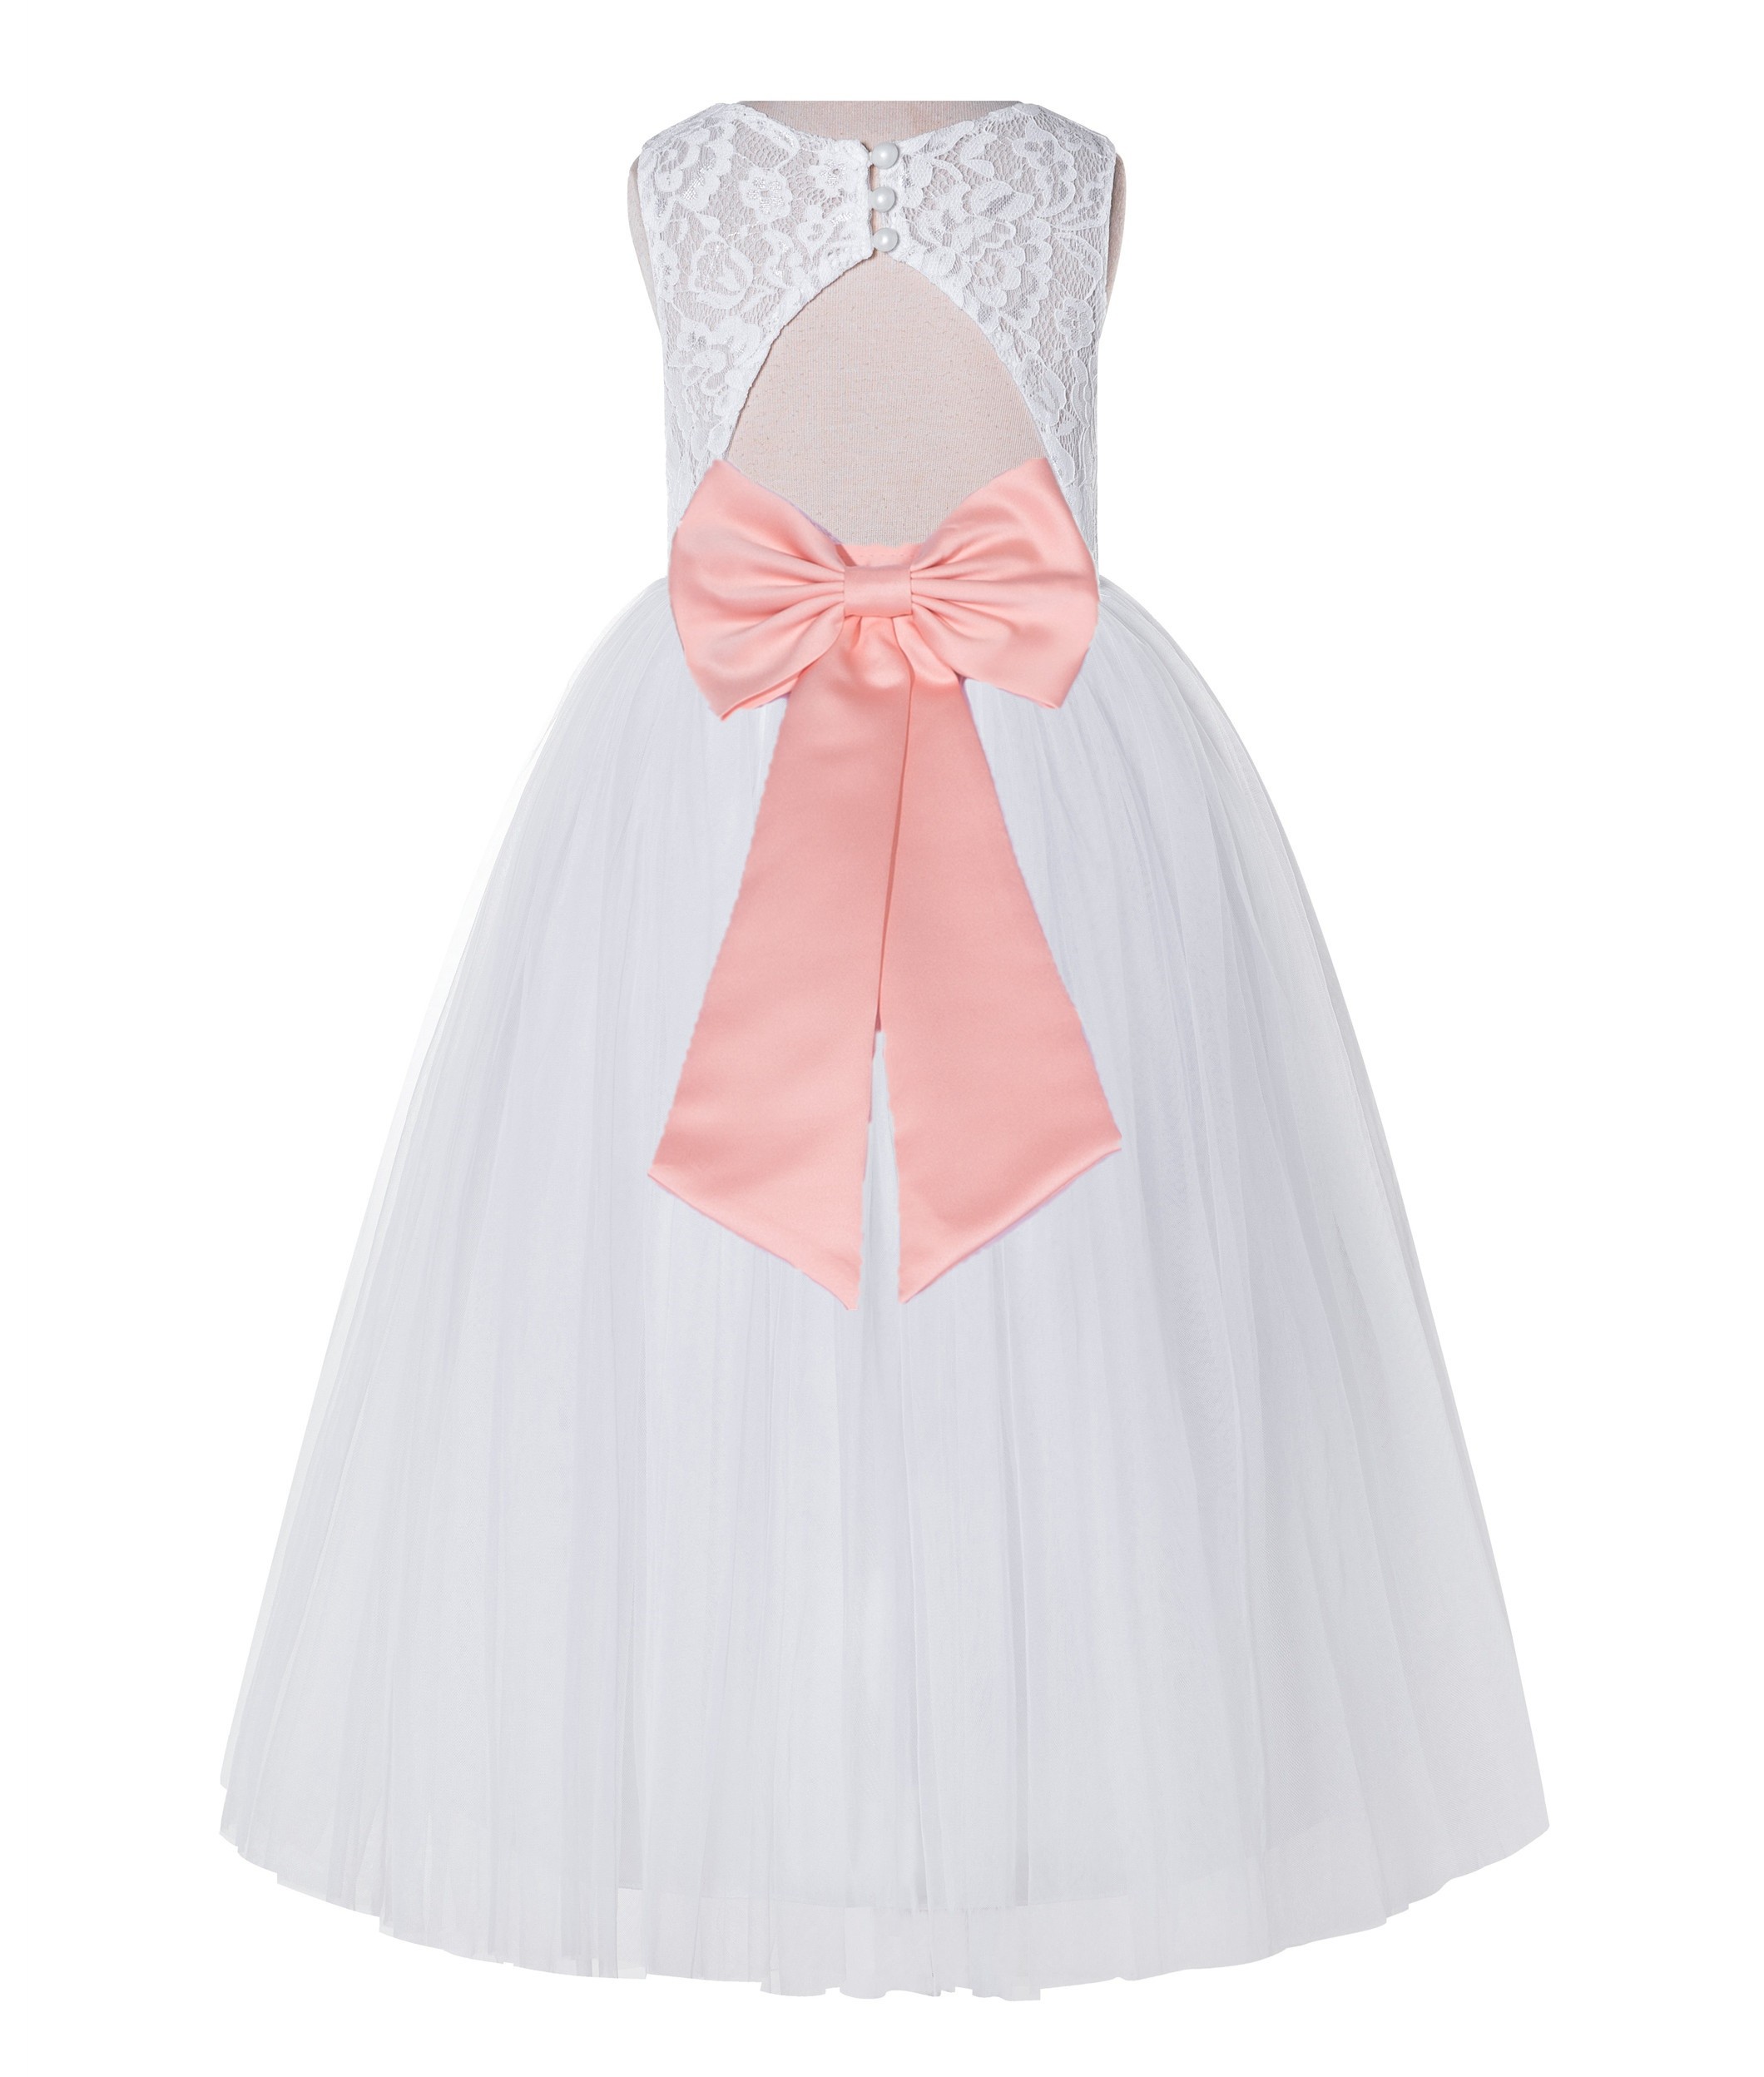 White / Bellini Peach Lace Tulle Scoop Neck Keyhole Back A-Line Flower Girl Dress 178